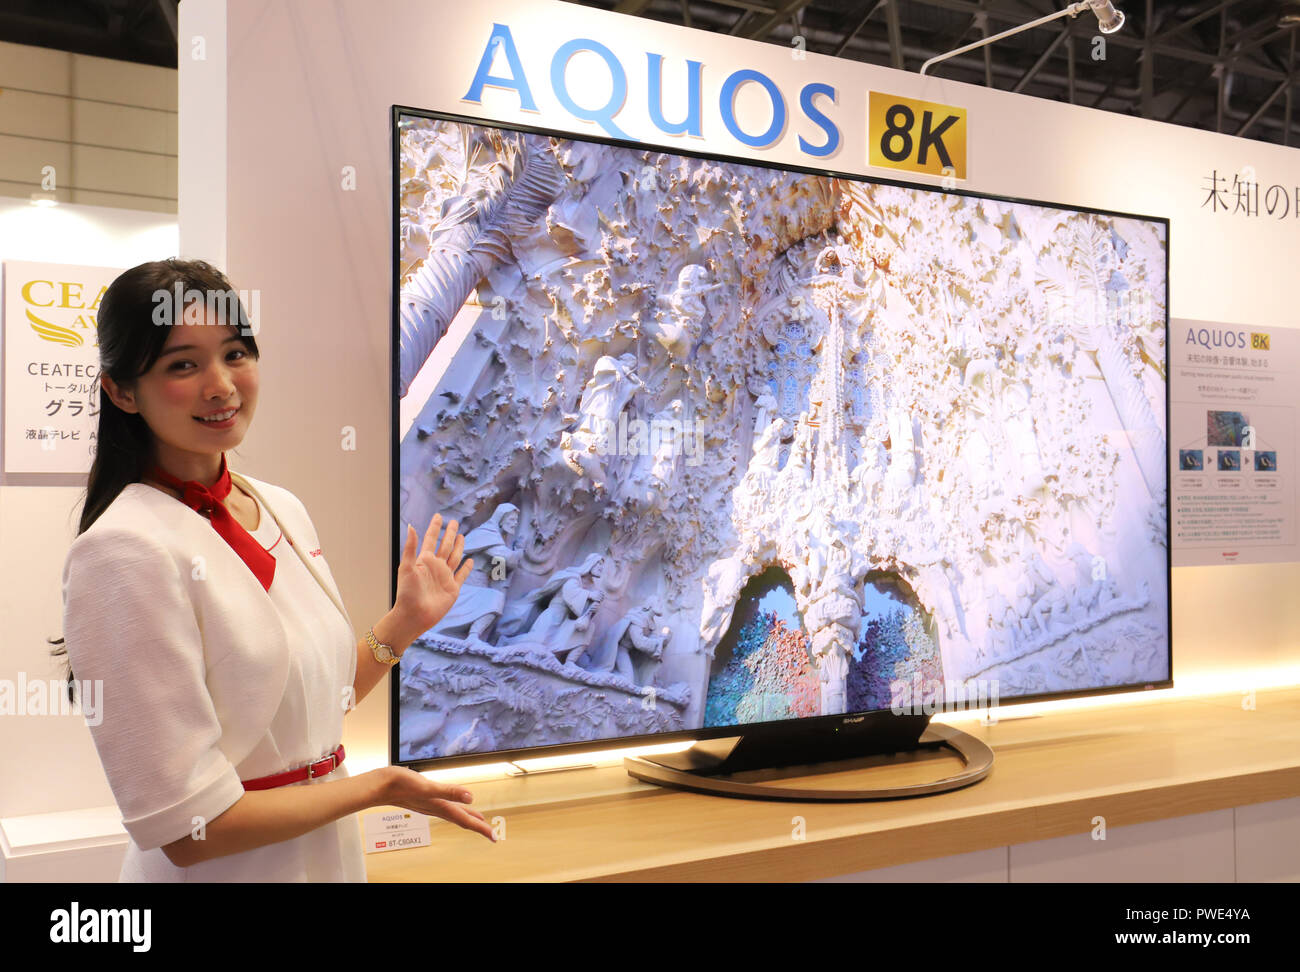 Chiba, Japan. 15th Oct, 2018. Japanese electronic giant Sharp displays  their latest 8K television set "AQUOS 8K" which will go on sale next month  at a press preview of the CEATEC electronics